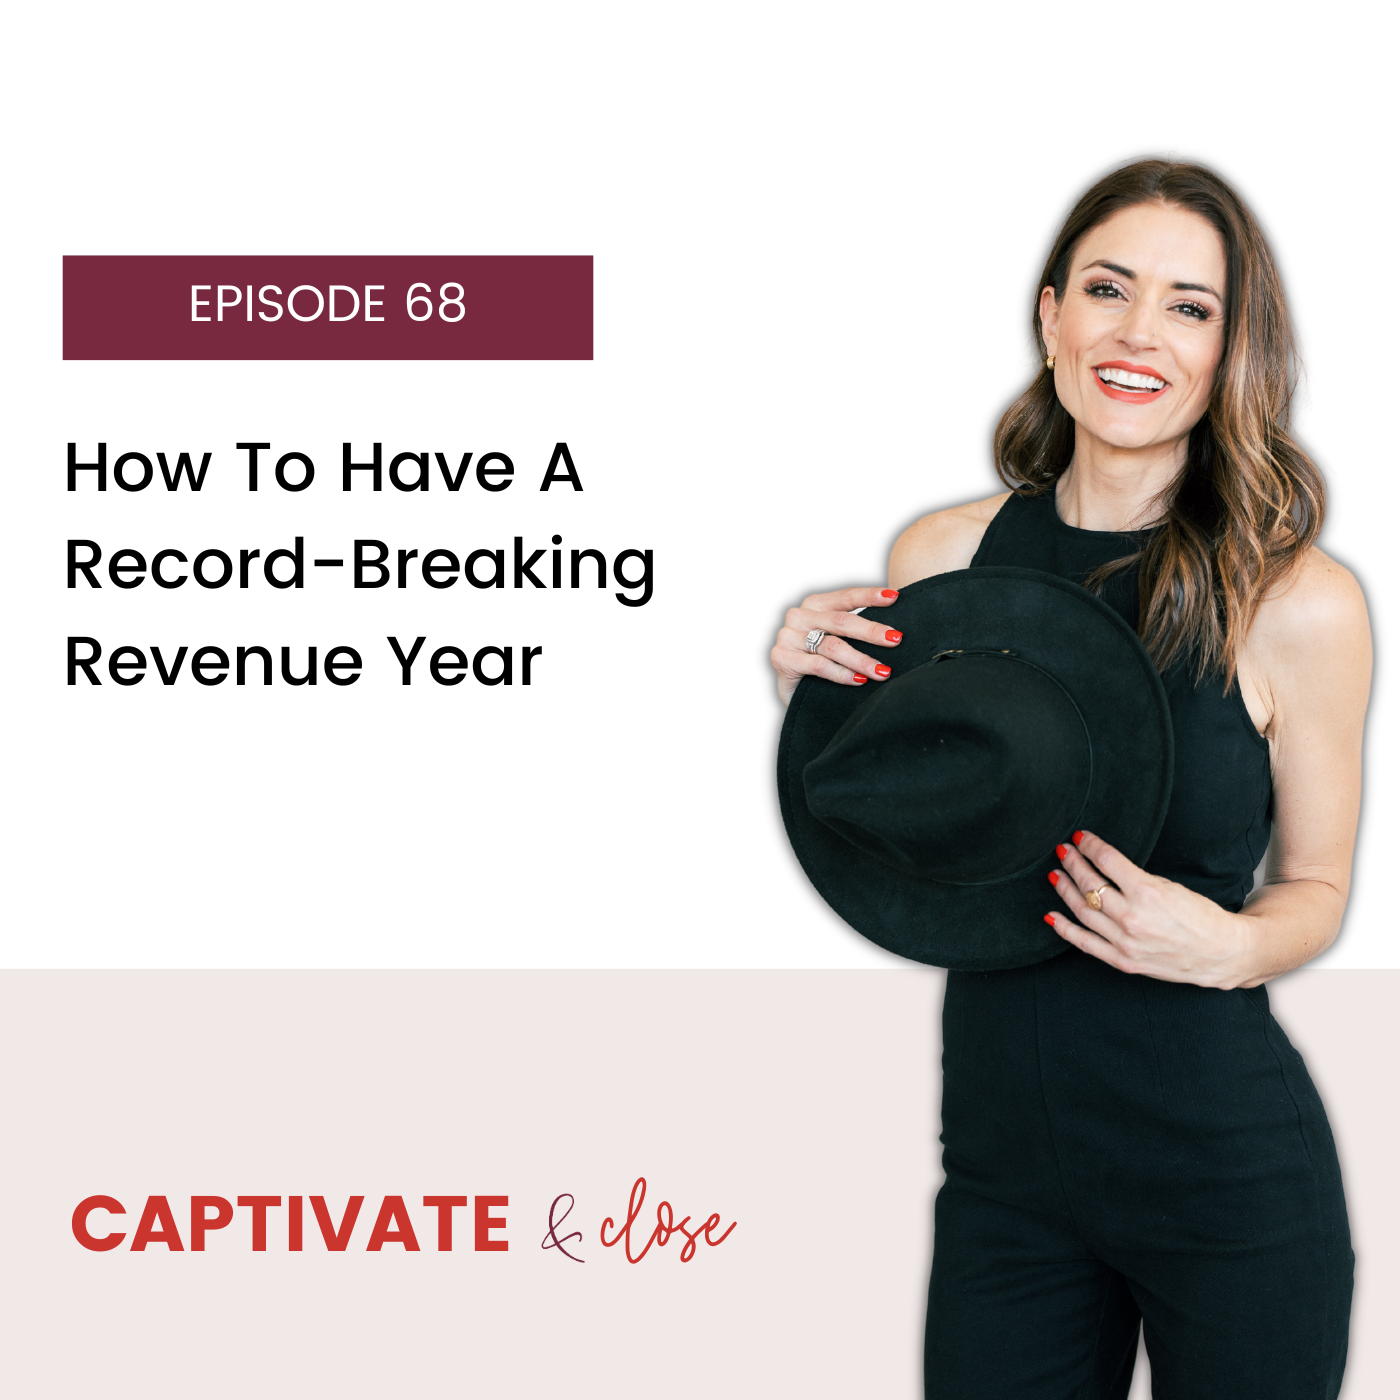 How To Have A Record-Breaking Revenue Year